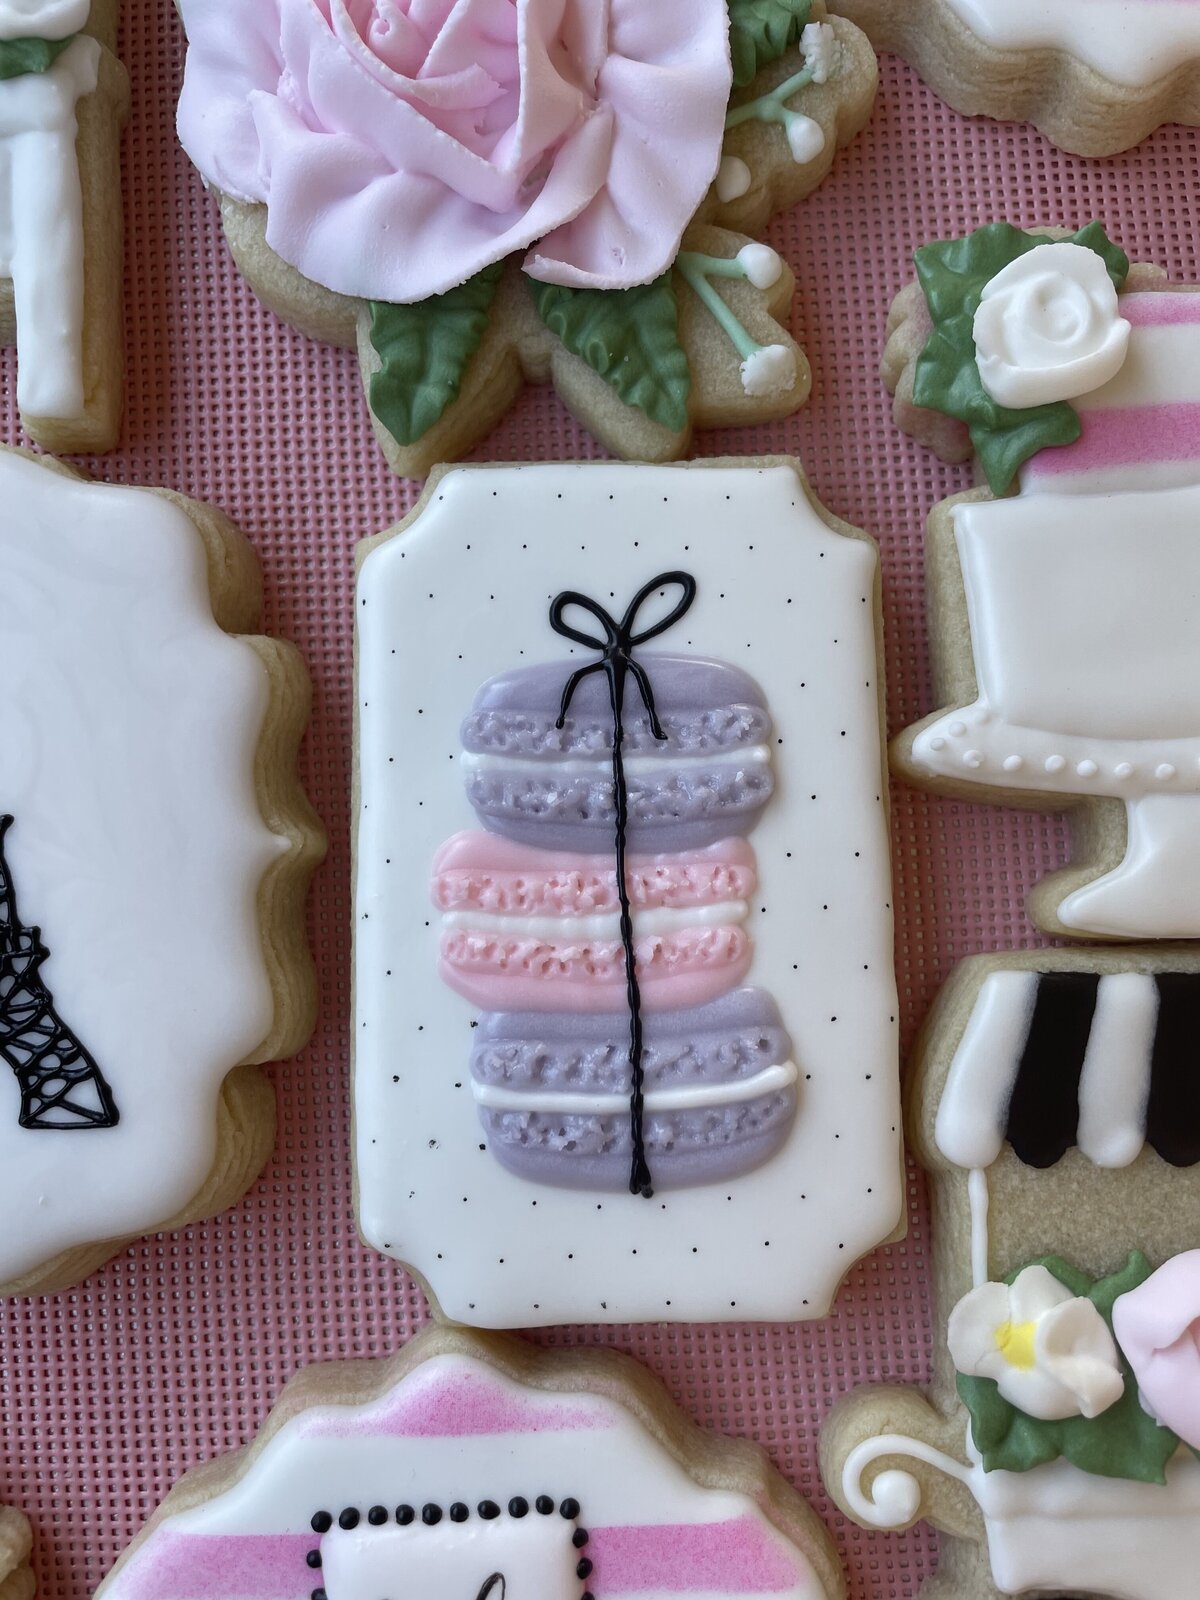 Custom-designed girly sugar cookies with intricate icing details, perfect for birthdays, made in Gilbert.